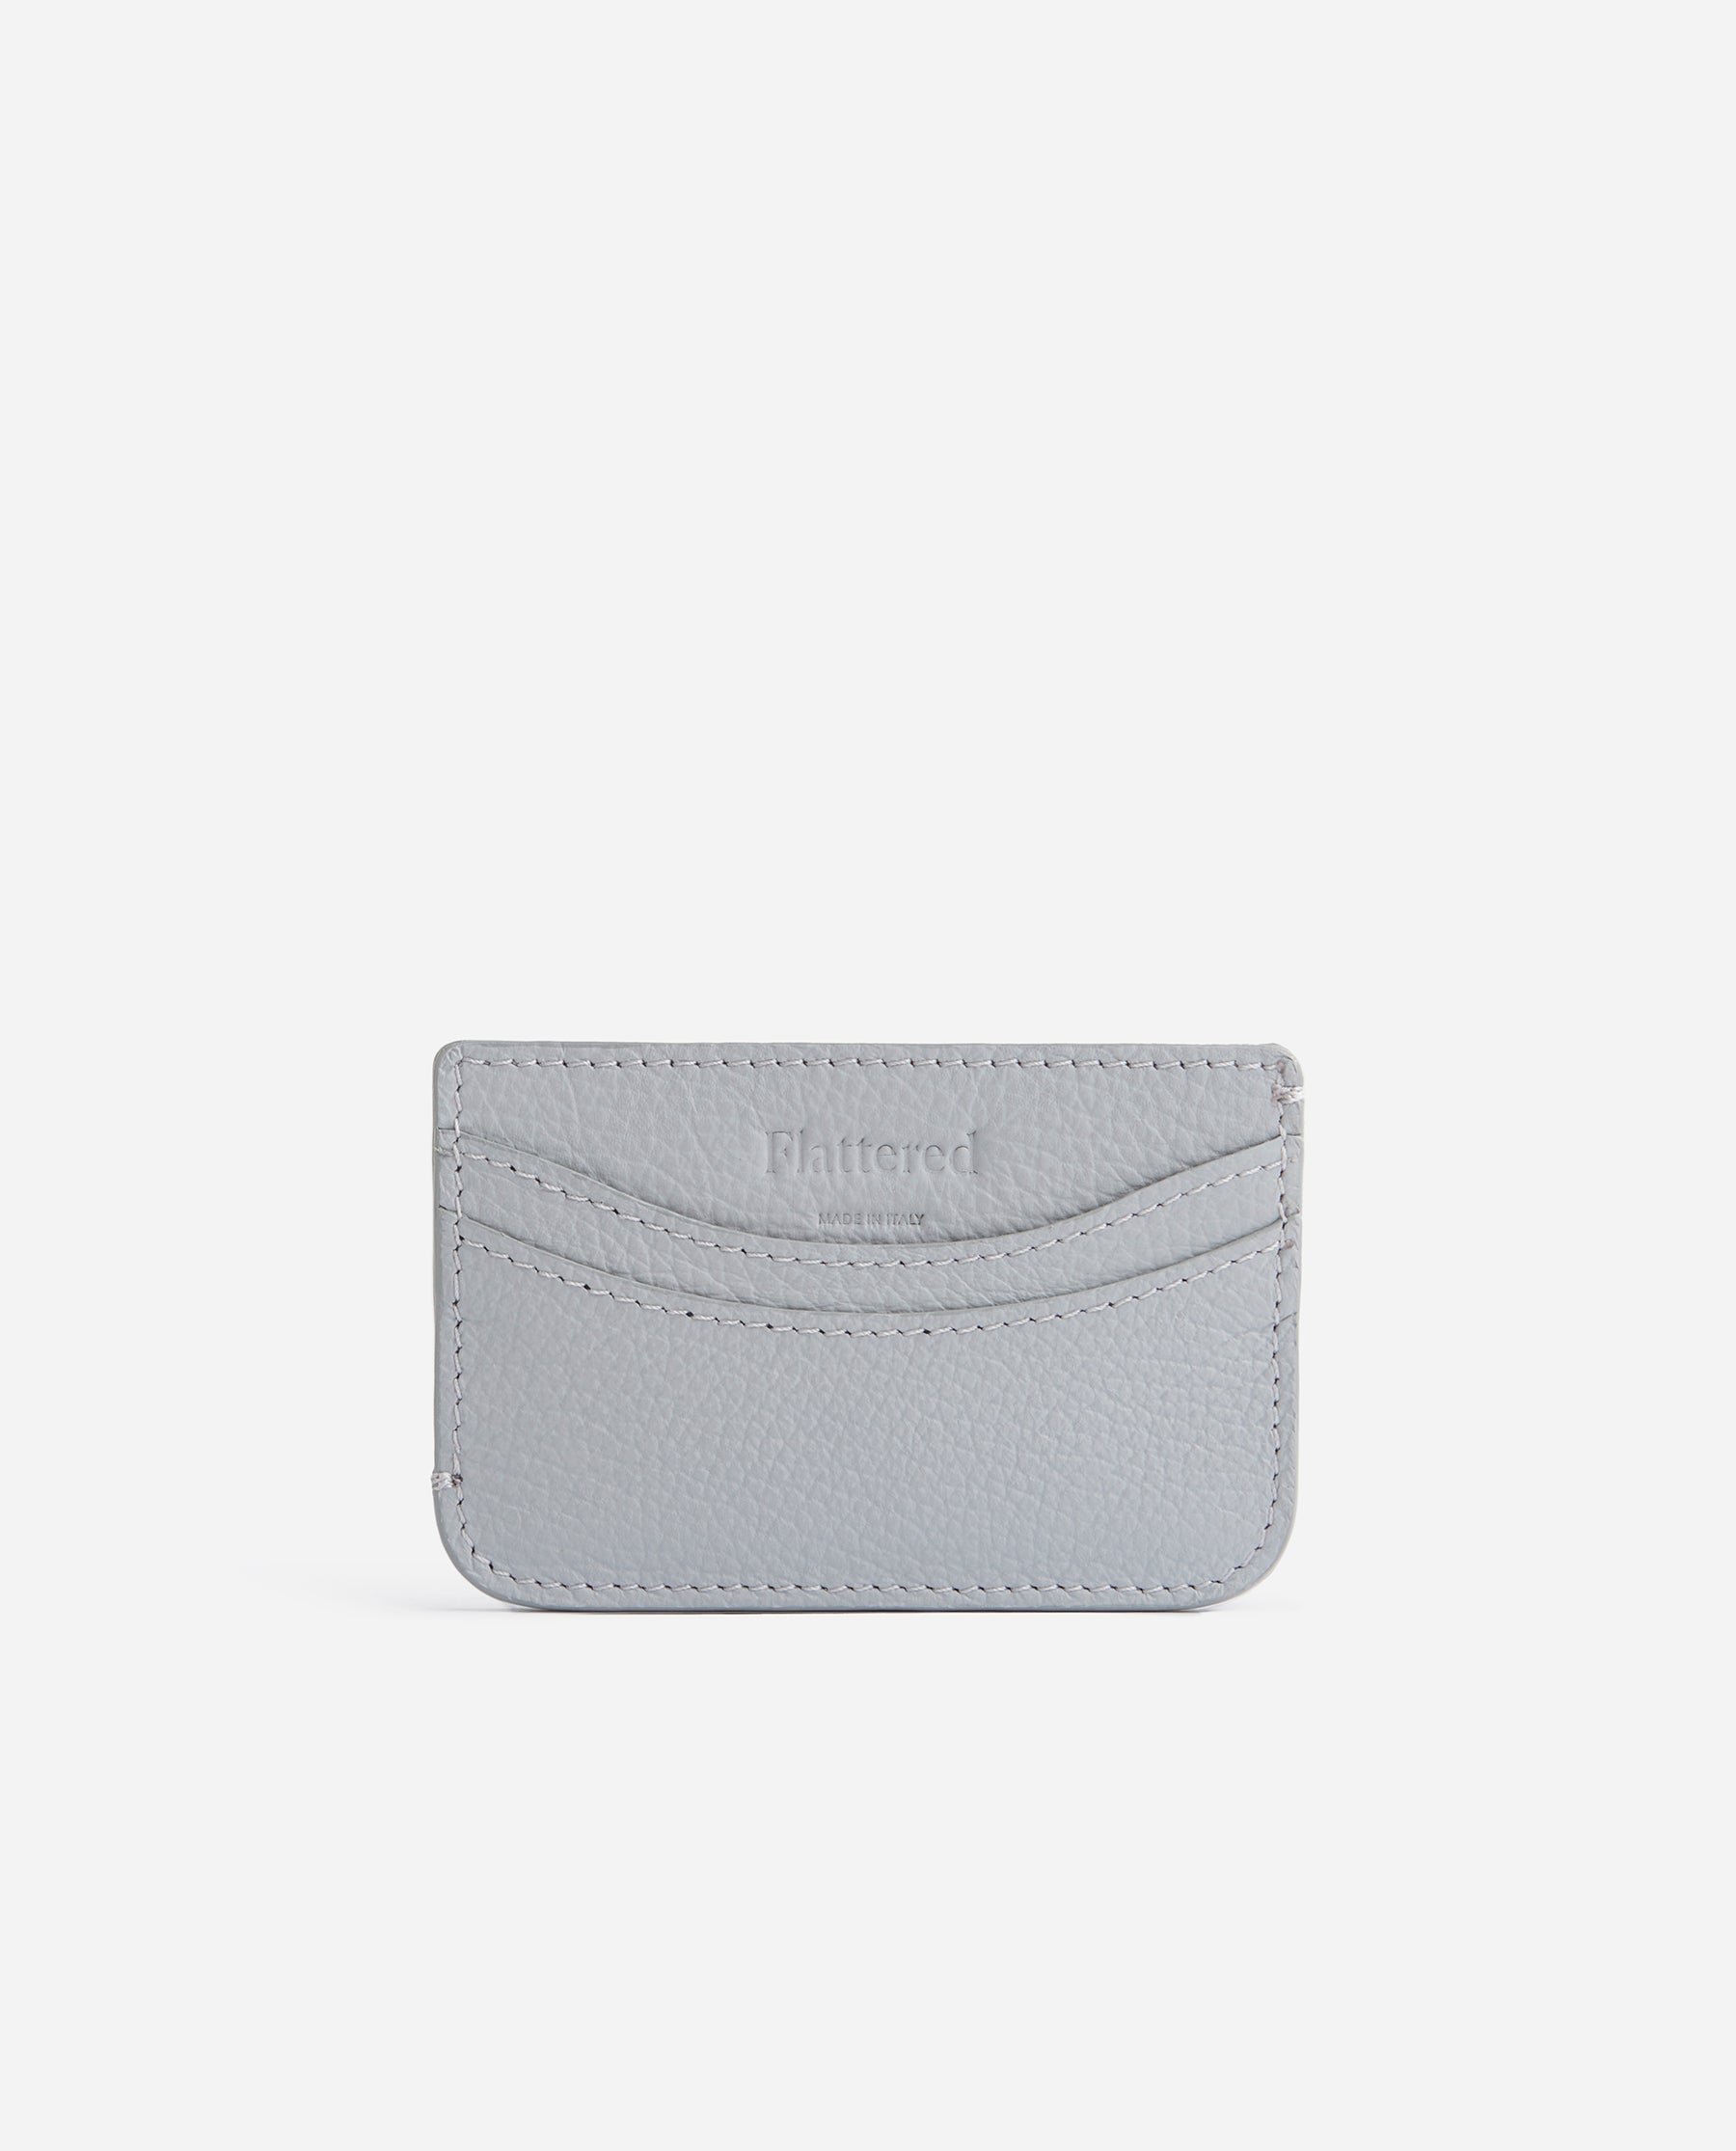 Flattered-OUTLET-SALE-Bonnie-Cardholder-Leather-Grey-Taschen-Onesize-Grey-Leather-ARCHIVE-COLLECTION-4.jpg